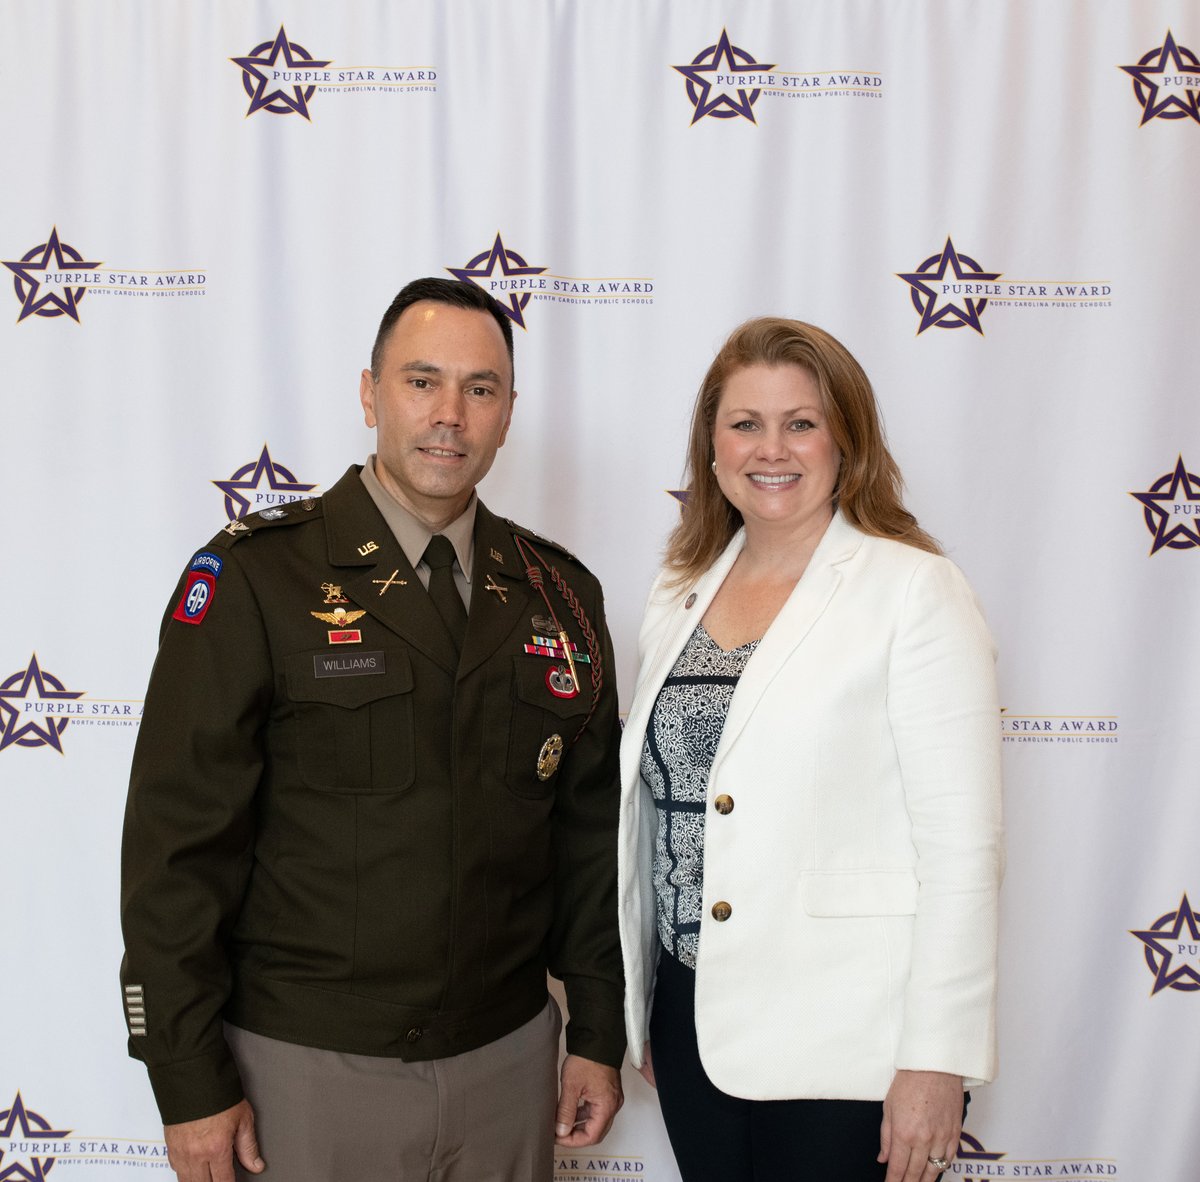 Today, NCDPI recognized 394 schools, from 26 districts & 9 charter schools for their commitment to military students & families with the Purple Star designation! Congrats to all the well-deserved recipients honored in a special ceremony at the @FridayInstitute.